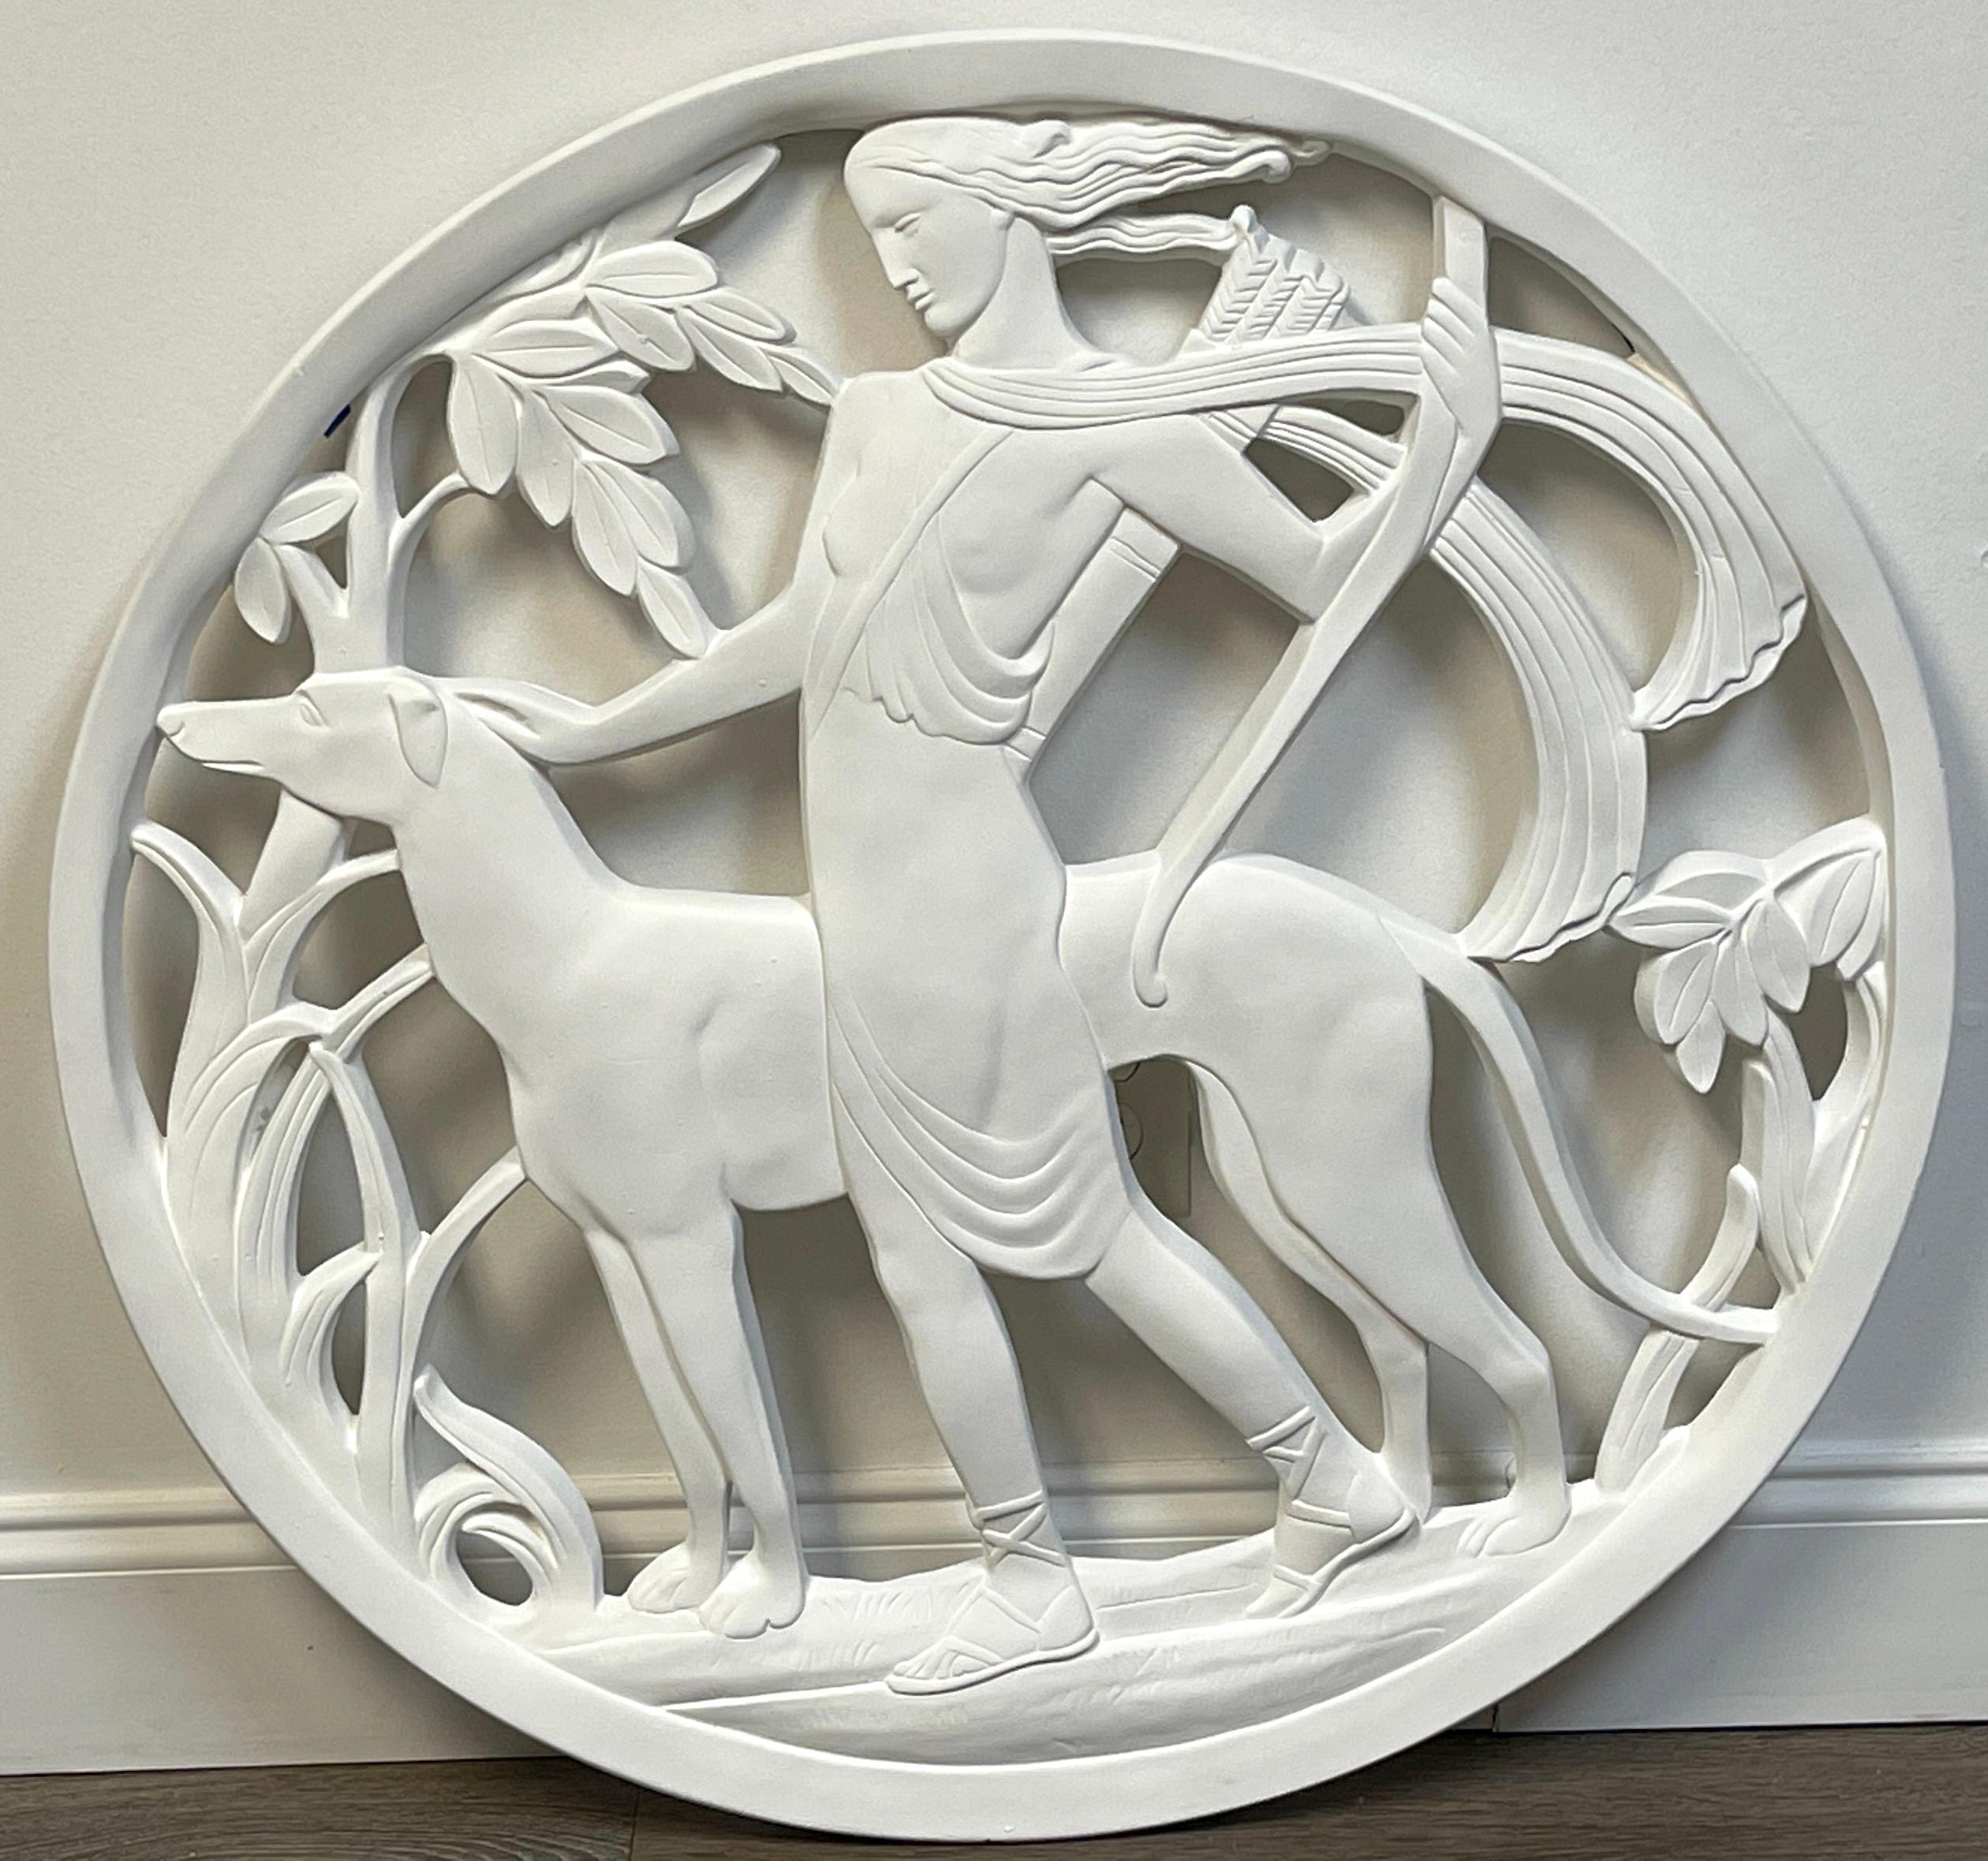 Art Deco Architectural Diana the Huntress Plaster Medallion / Plaque 
Attributed to the American G.R. Fixtures Co., of Grand Rapids Mi, (1915-1940)
A fine period example, the pierced terracotta wall sculpture with influences of American artist